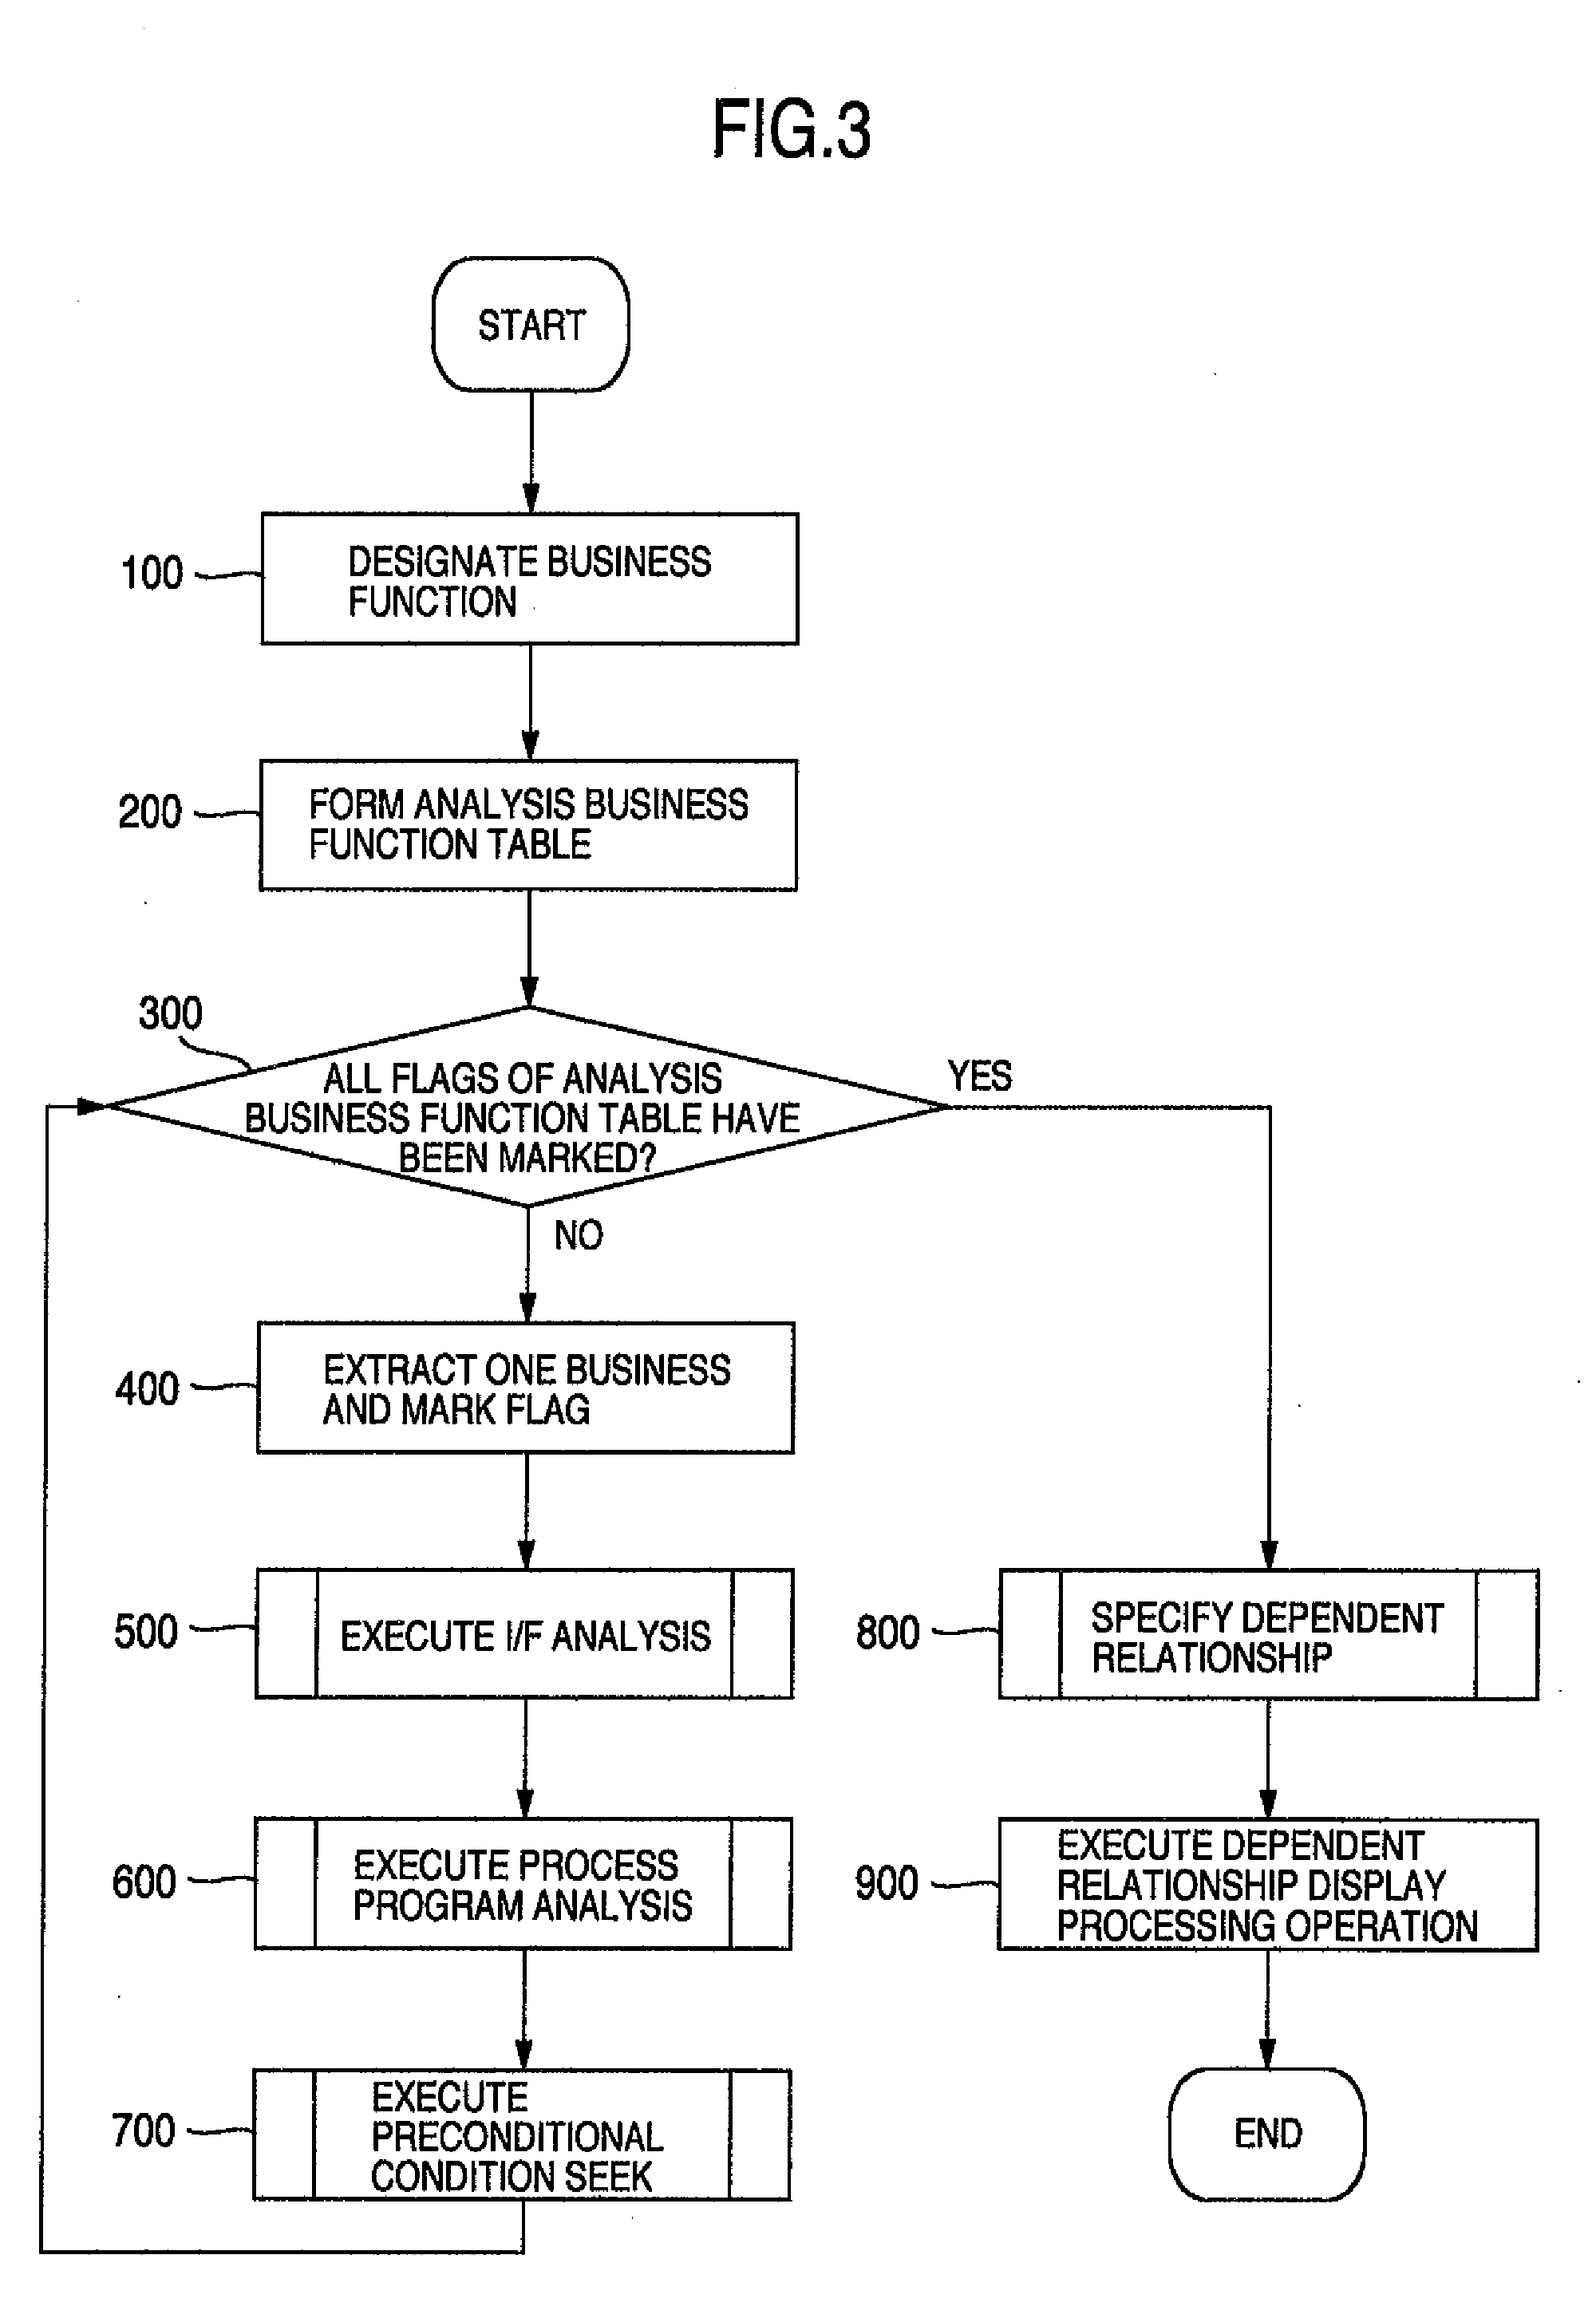 Business specification comprehension assistance system and method